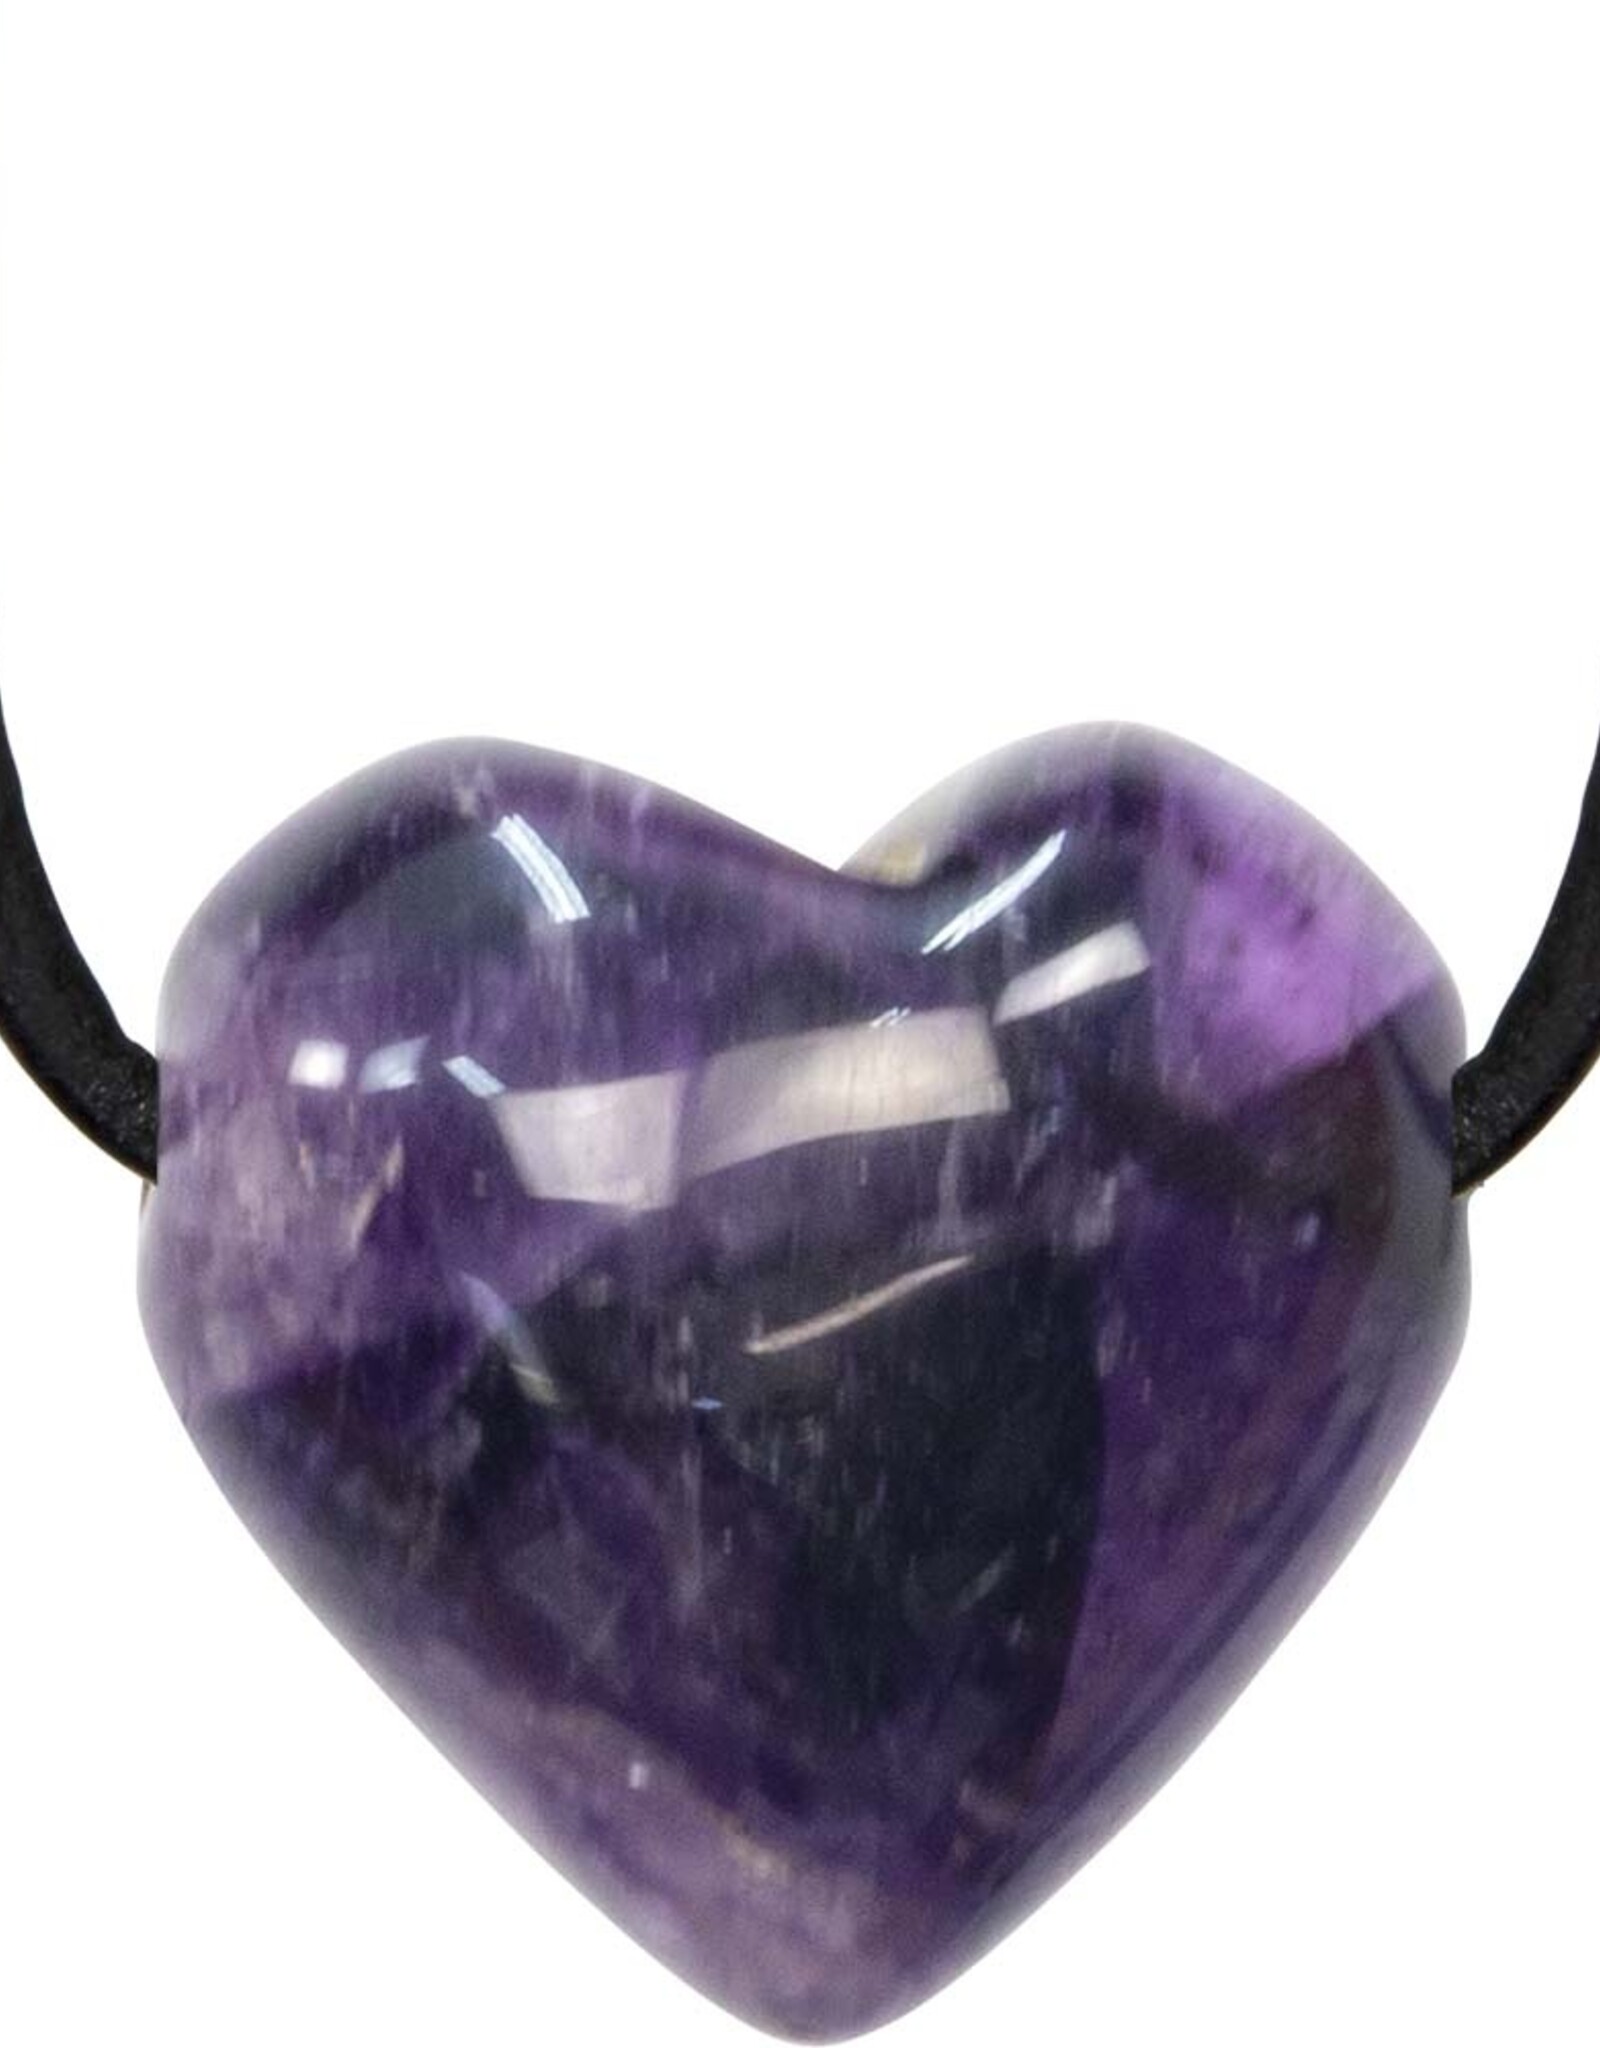 NECKLACE - AMETHYST PUFFED HEART - 1"X1"